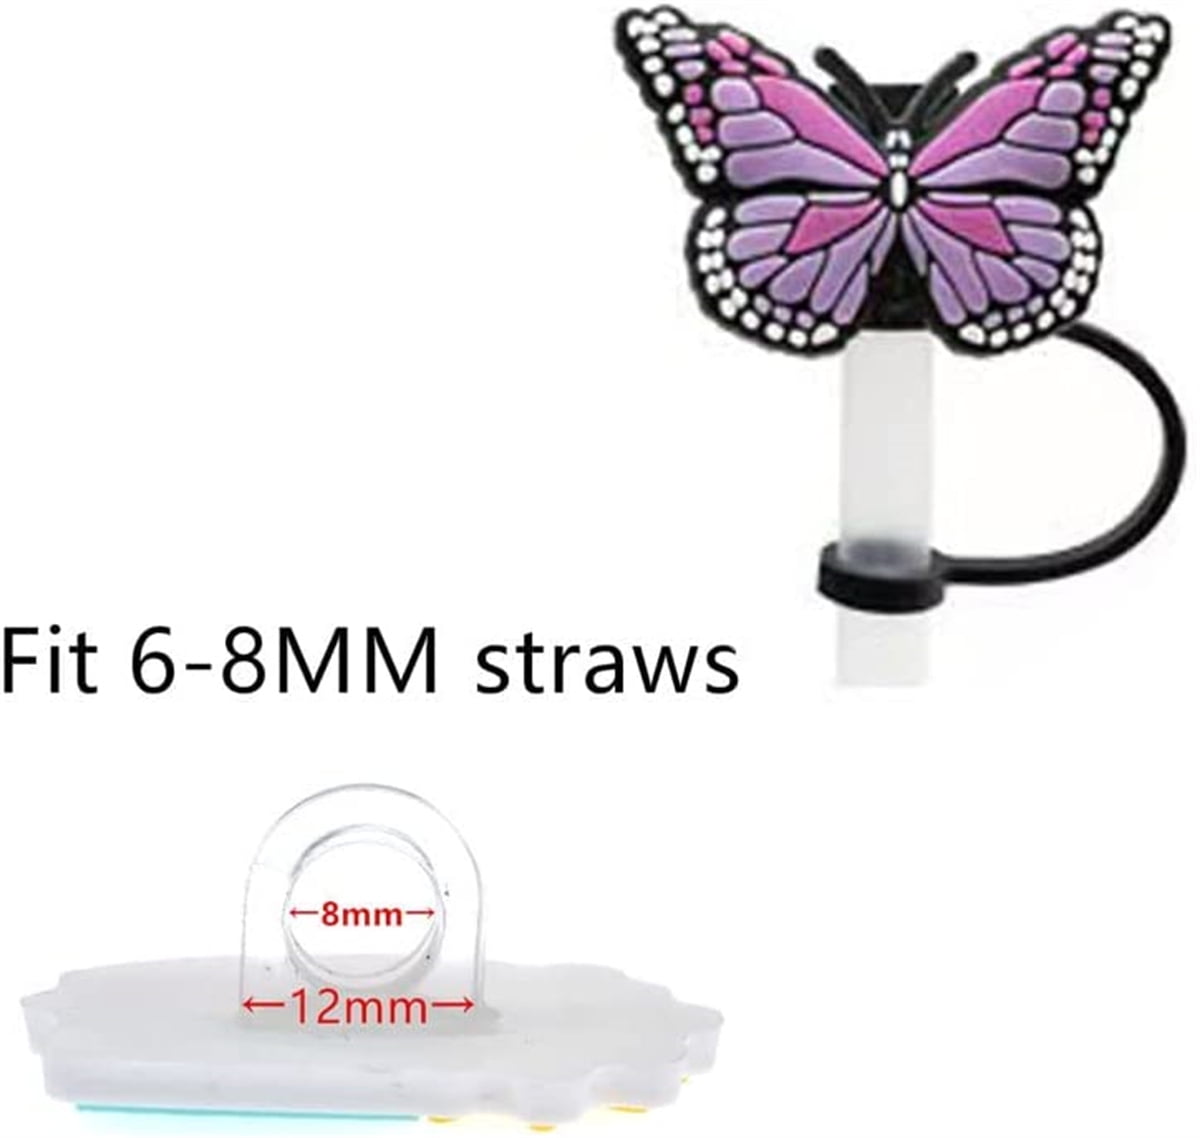 36Pcs Reusable Silicone Straw Cover,Colorful Dust-Proof Straw Plug for 8mm  Straws Home Kitchen Party Decoration - AliExpress